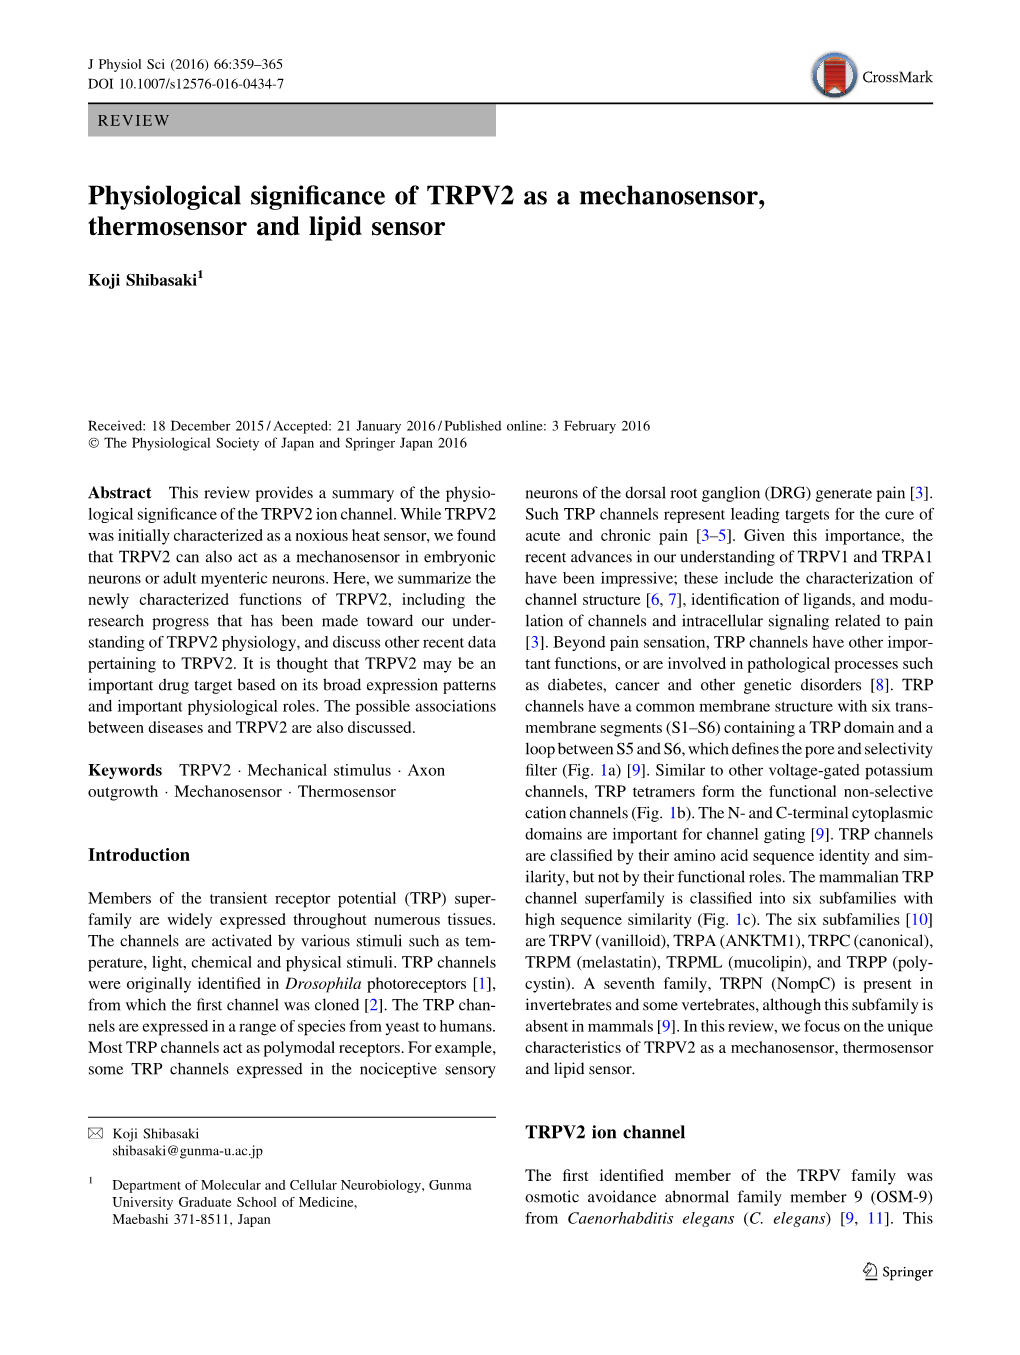 Physiological Significance of TRPV2 As a Mechanosensor, Thermosensor